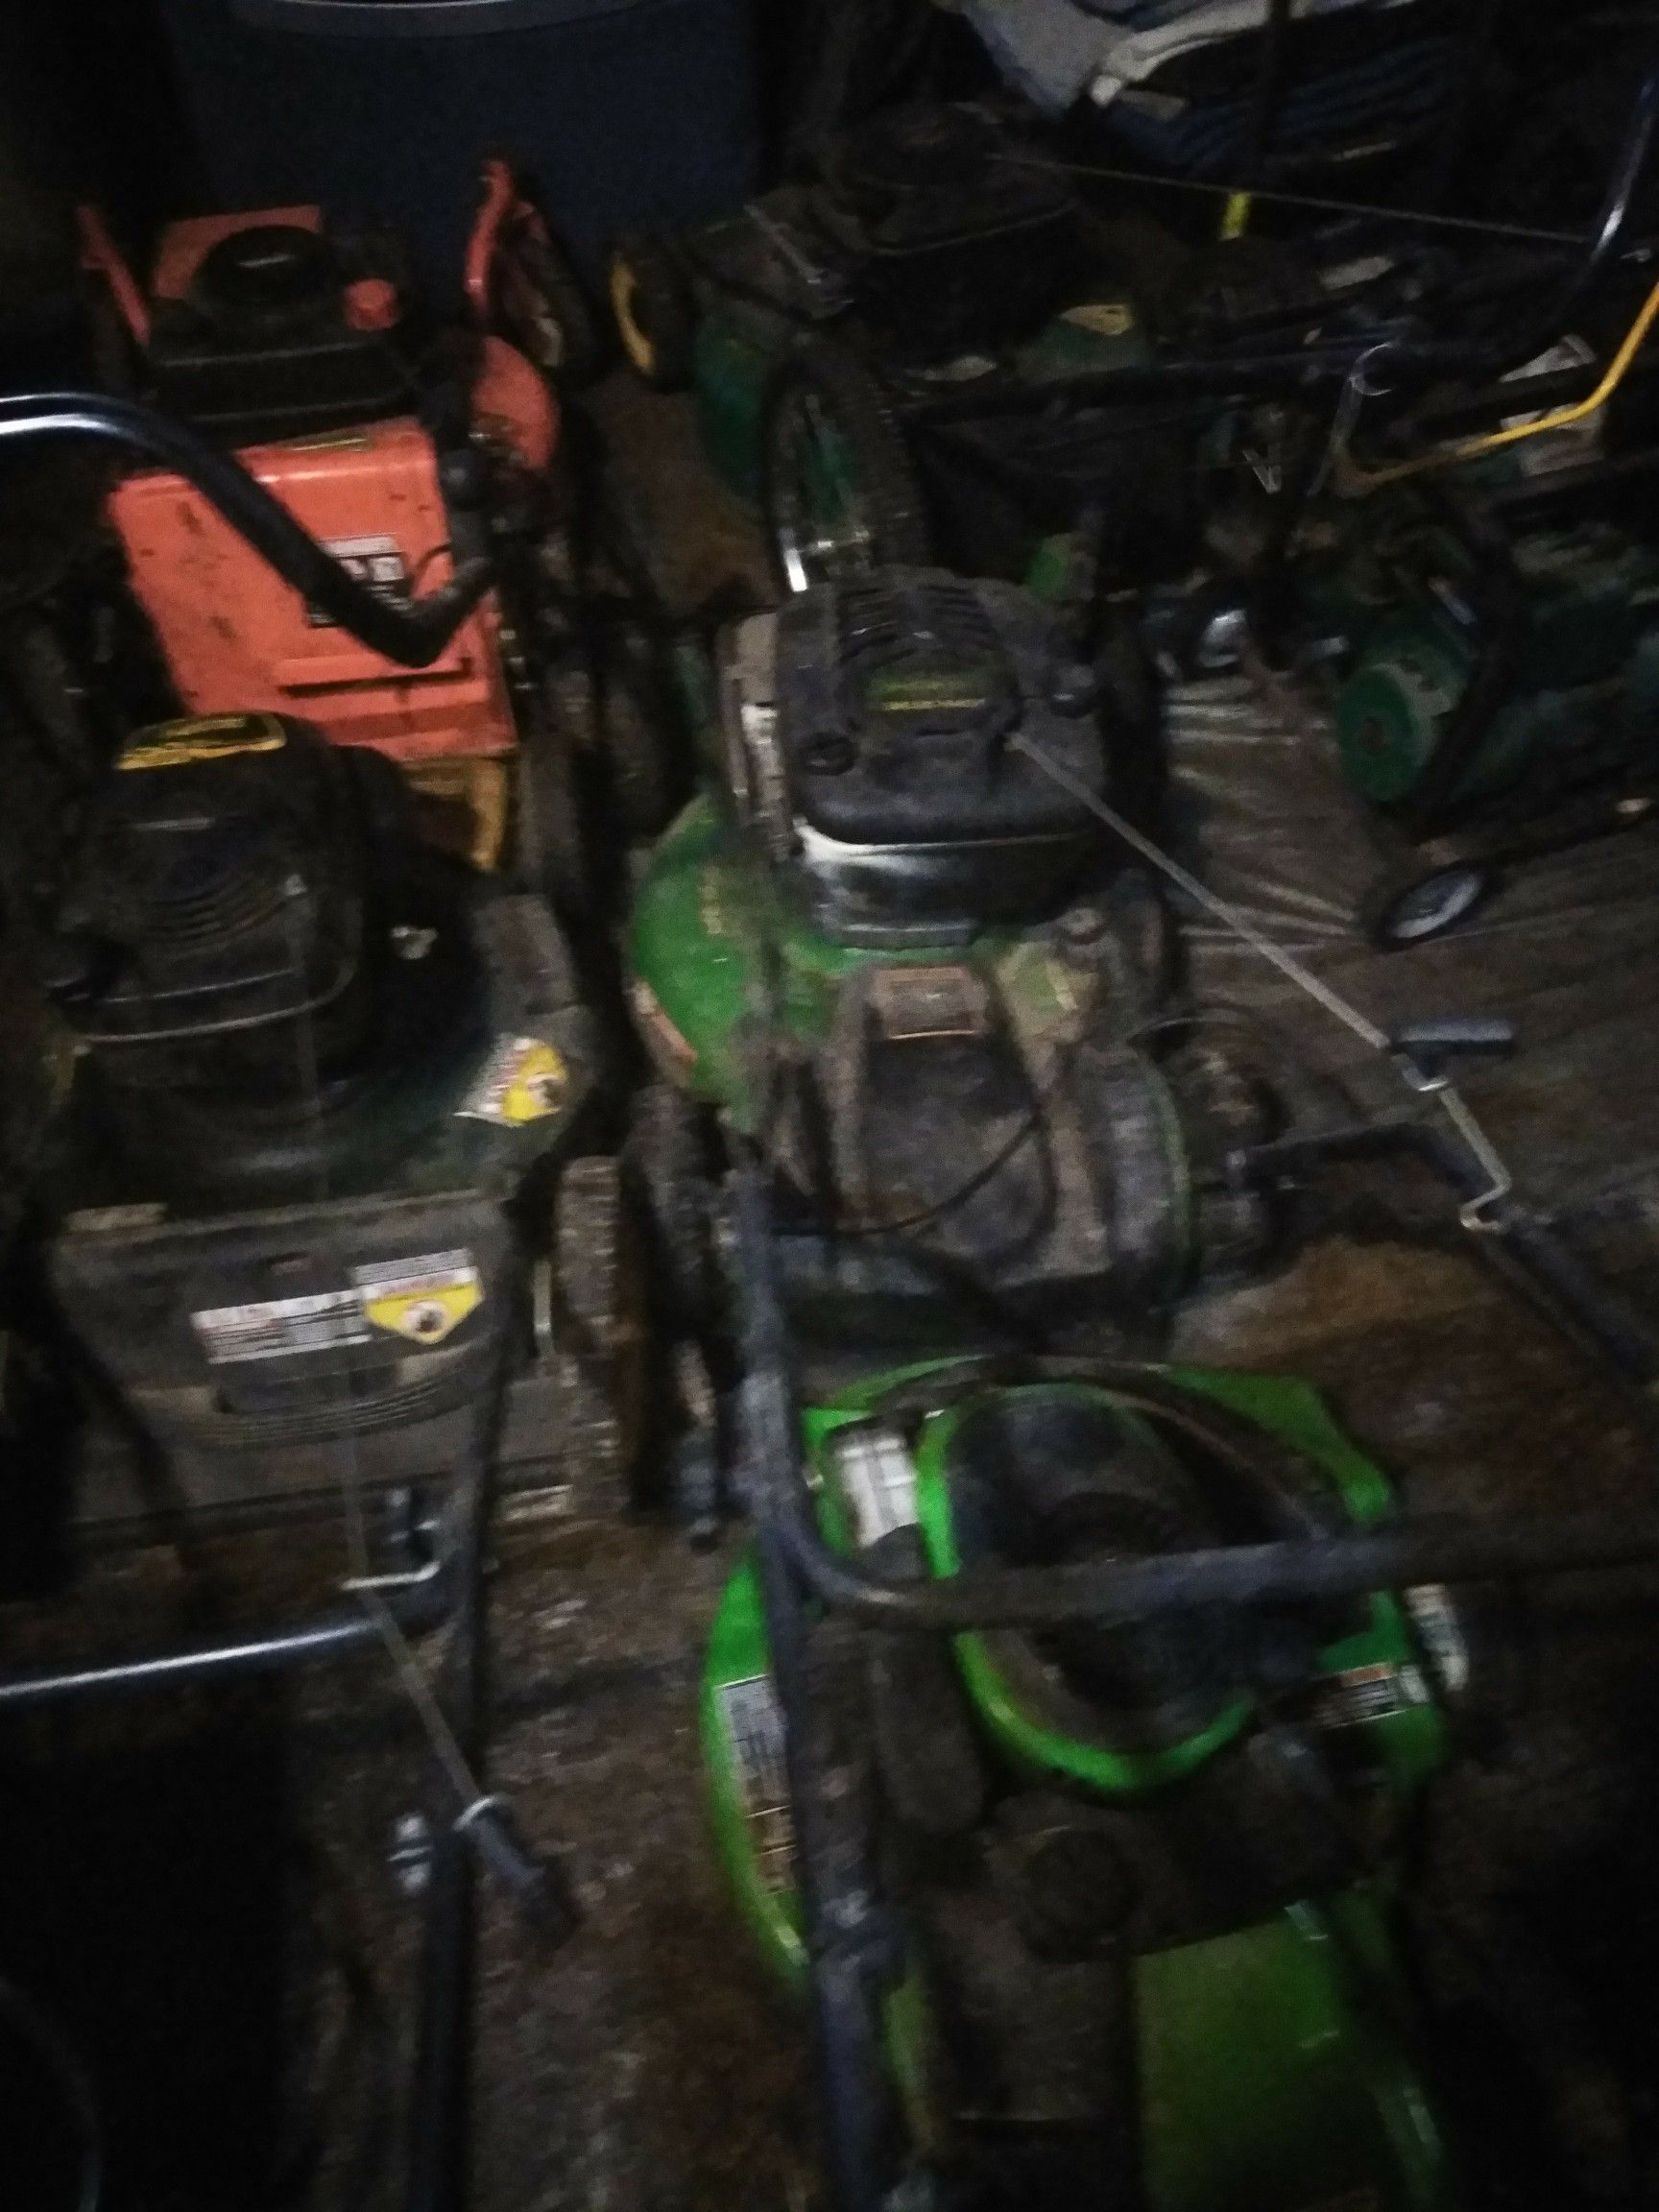 5 to 10 Used Lawn mower some working / some not